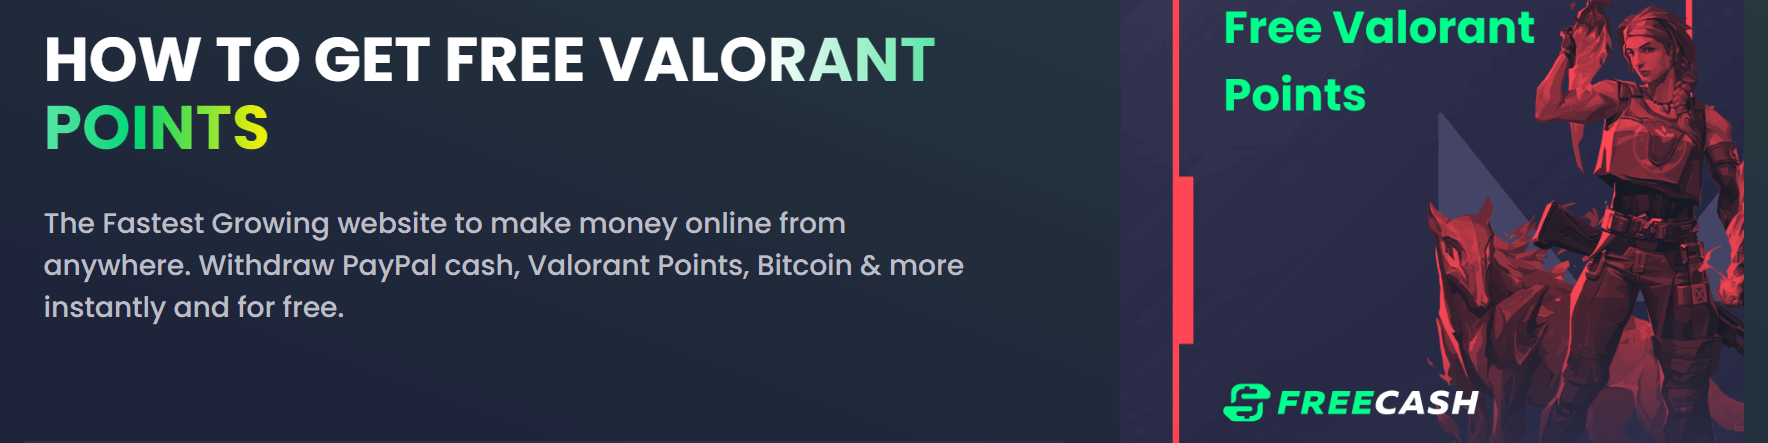 freecash how to earn valorant points